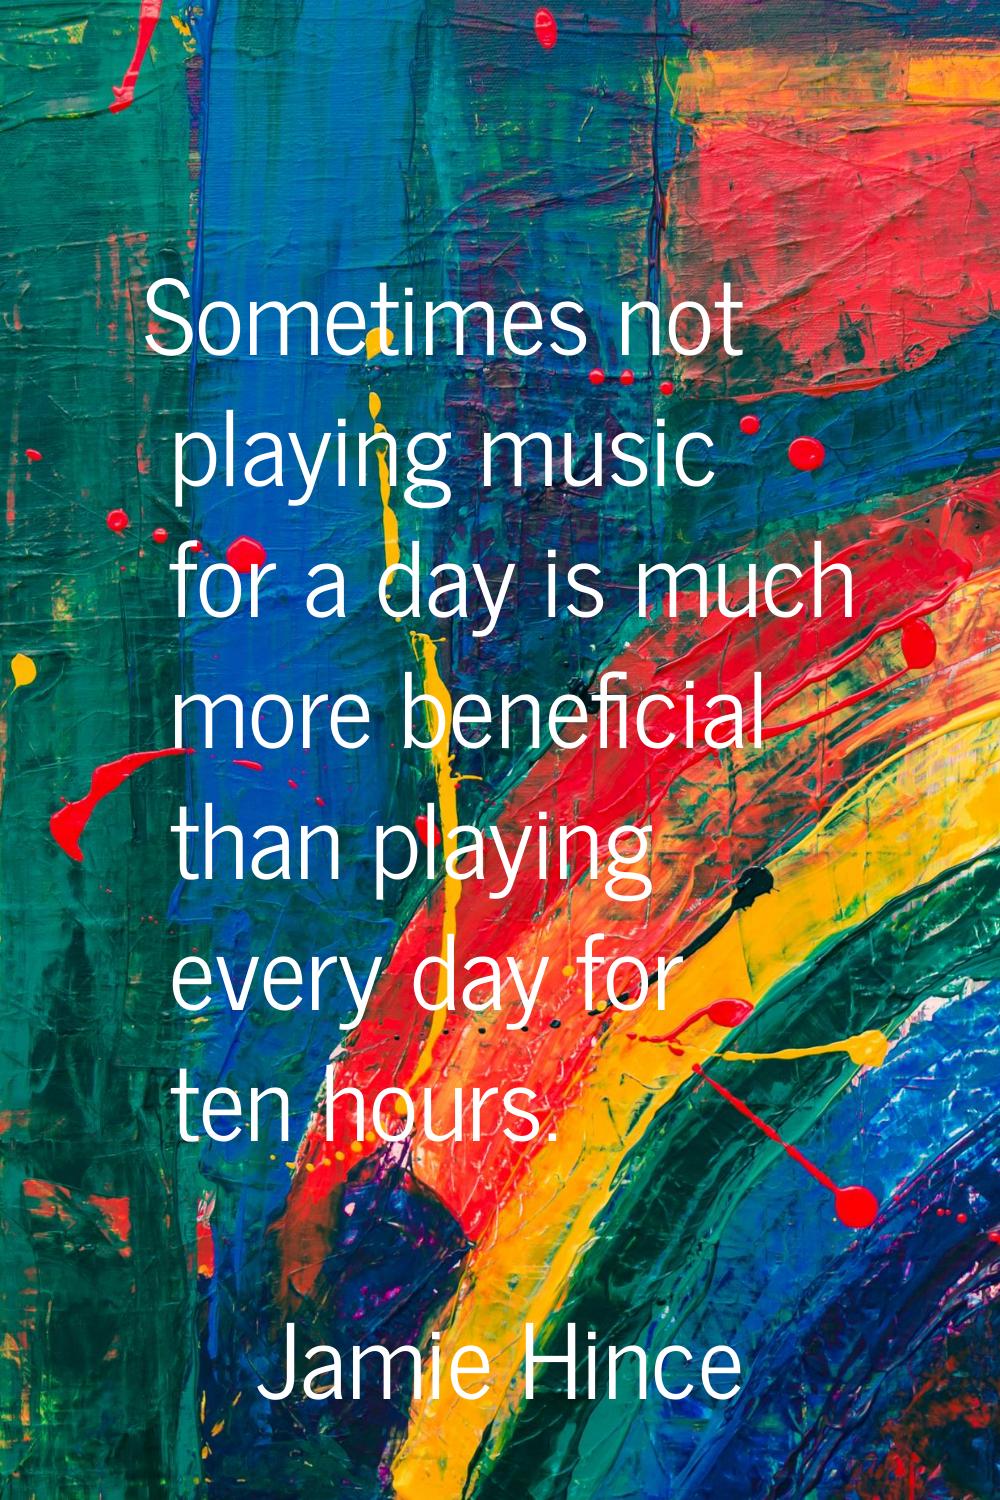 Sometimes not playing music for a day is much more beneficial than playing every day for ten hours.